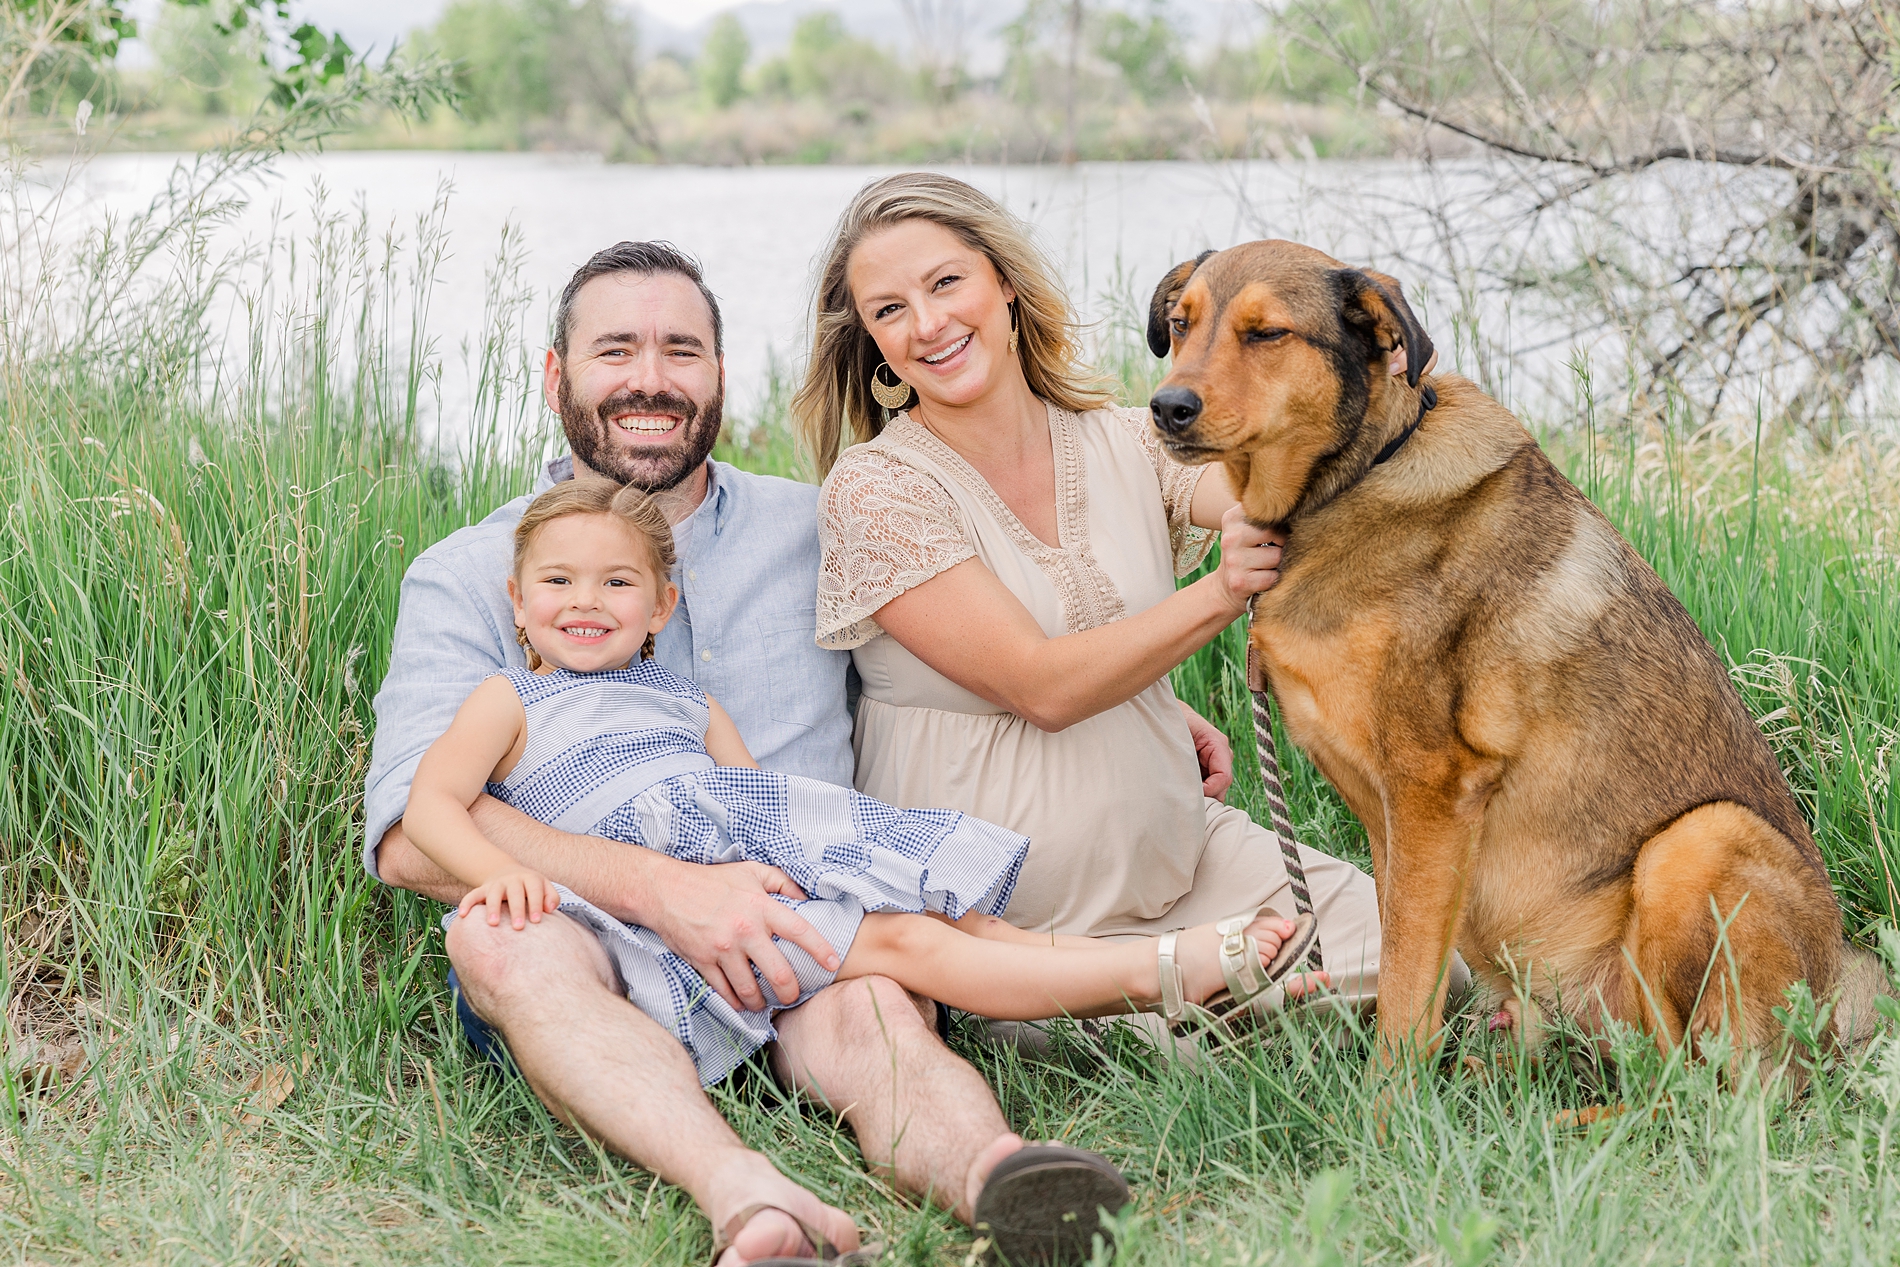  8 Tips for including your dog in Family Photos 